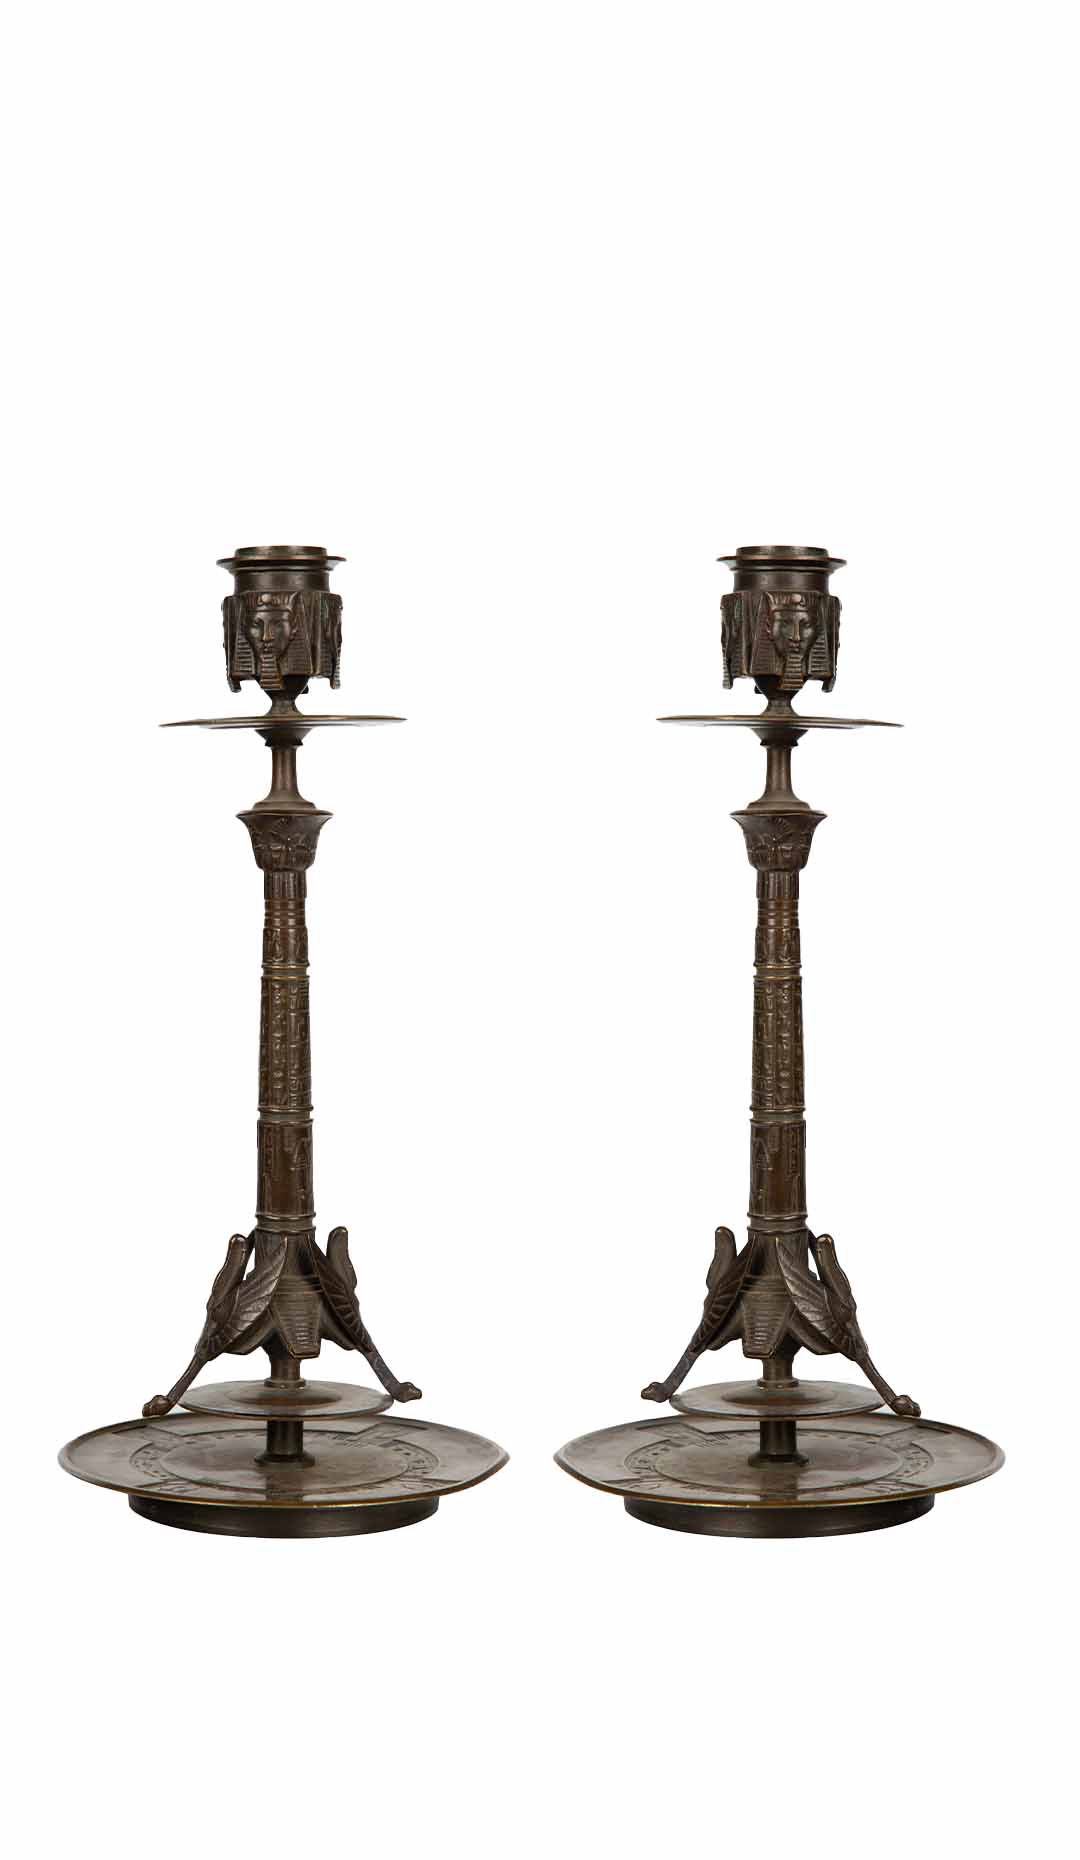 Egyptian Revival Candlestick Pair